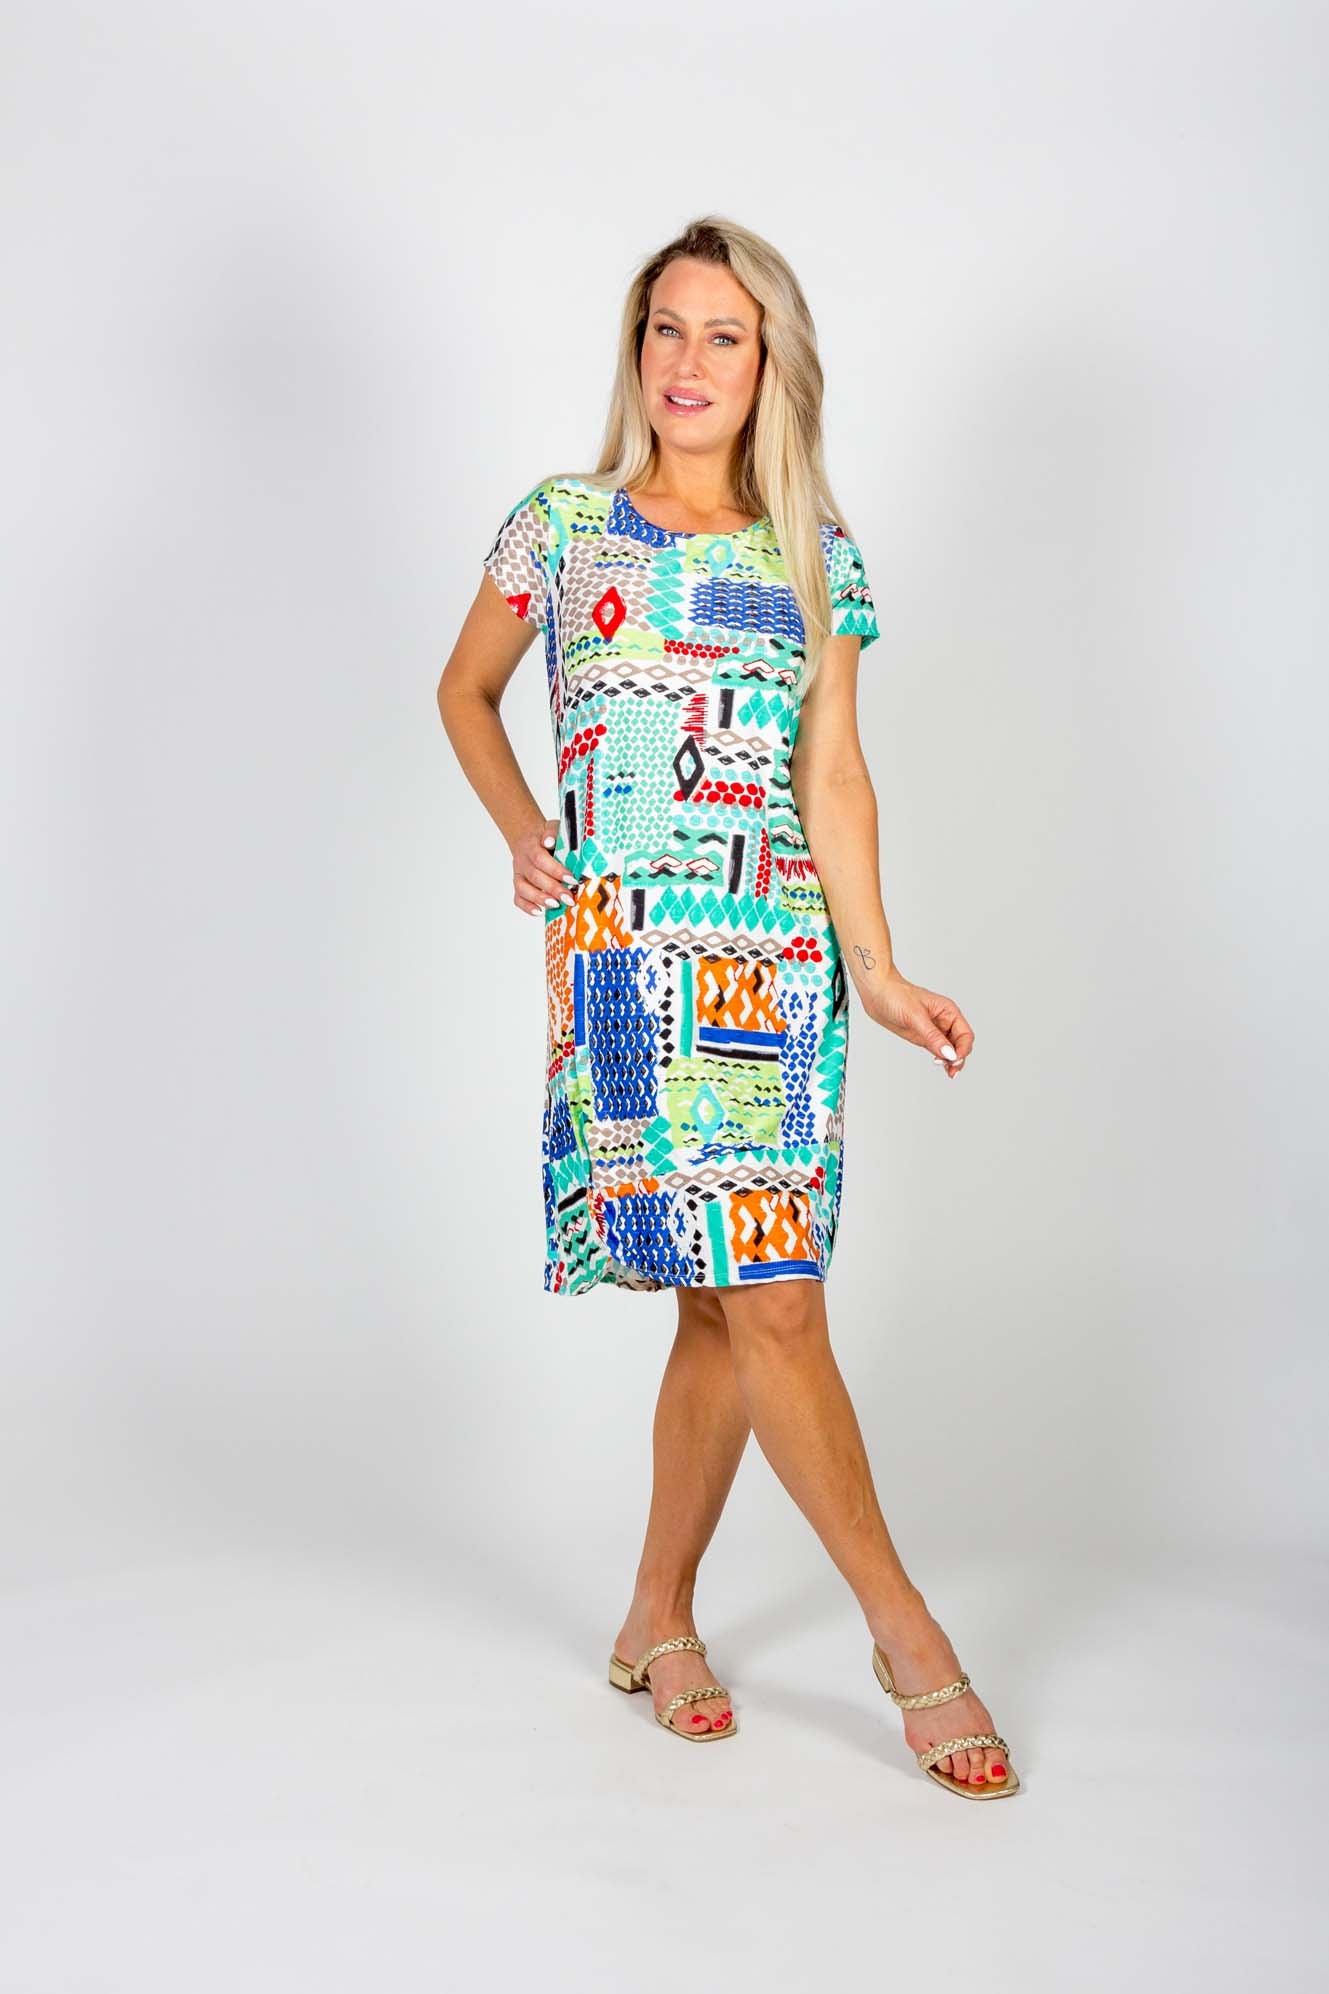 A woman wearing the Chastity Dress by Pure Essence in a geometric Aqua/Blue print stands in front of a white background 